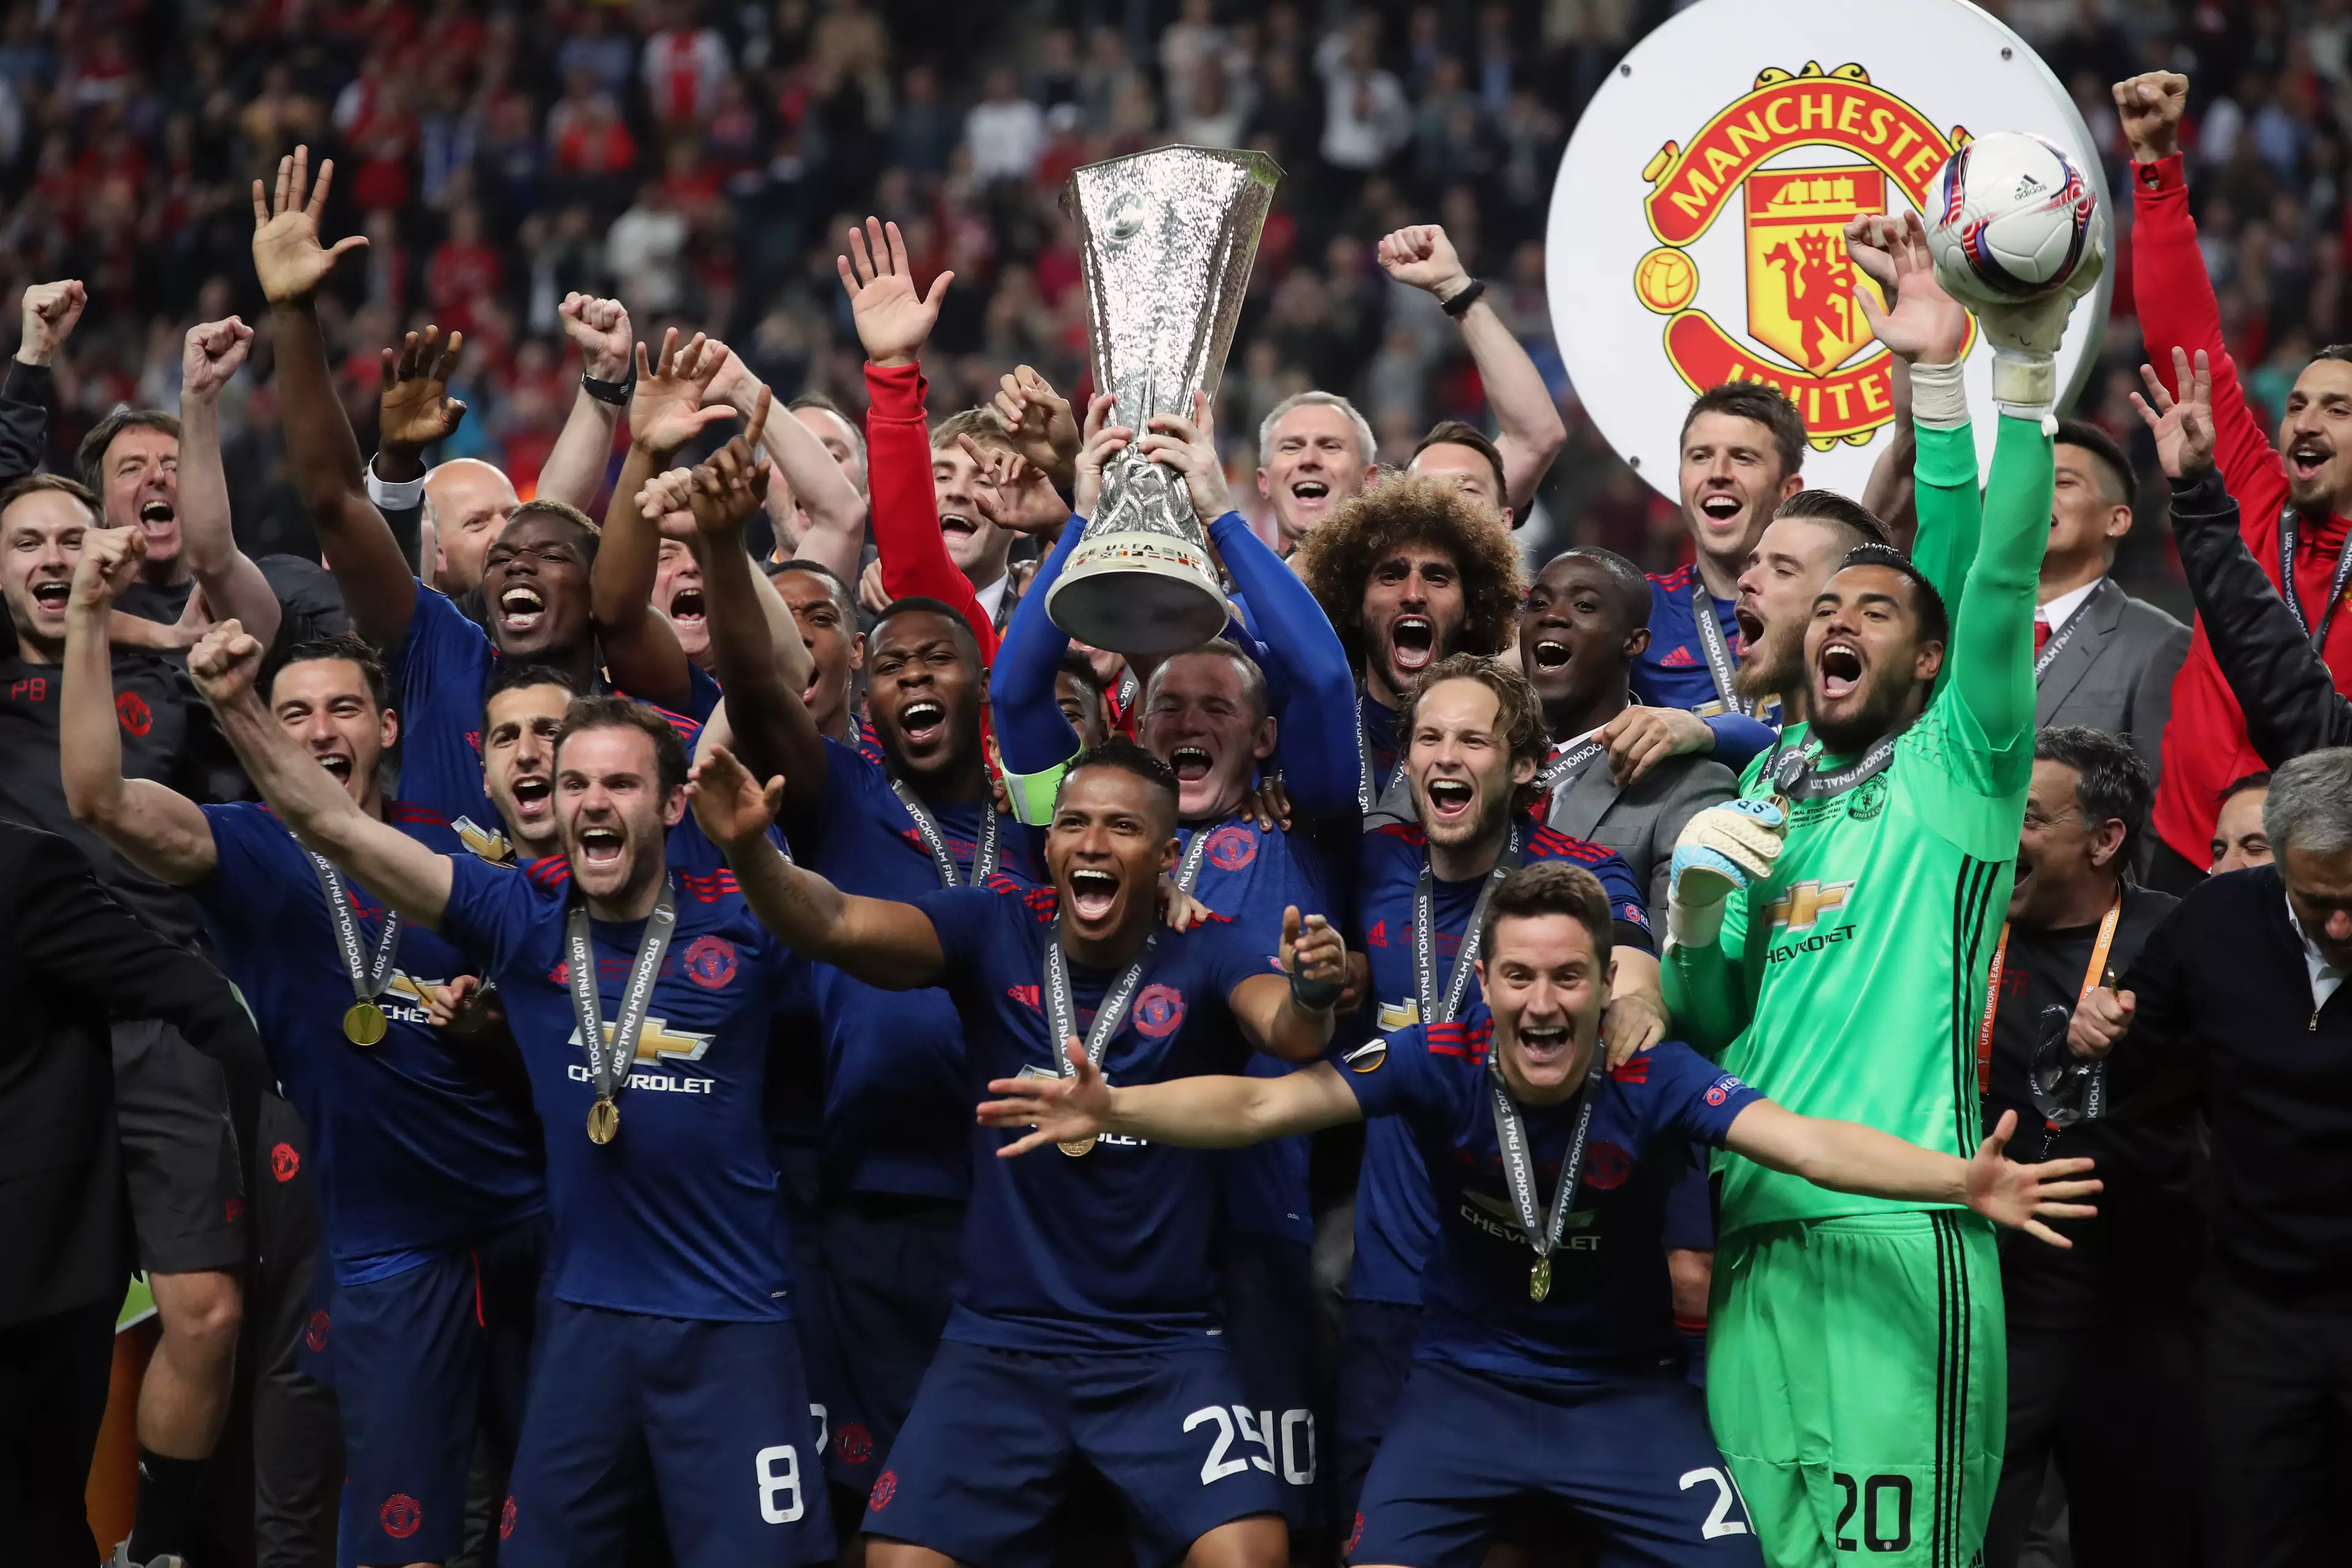 Manchester United last won the Europa League under former manager Jose Mourinho